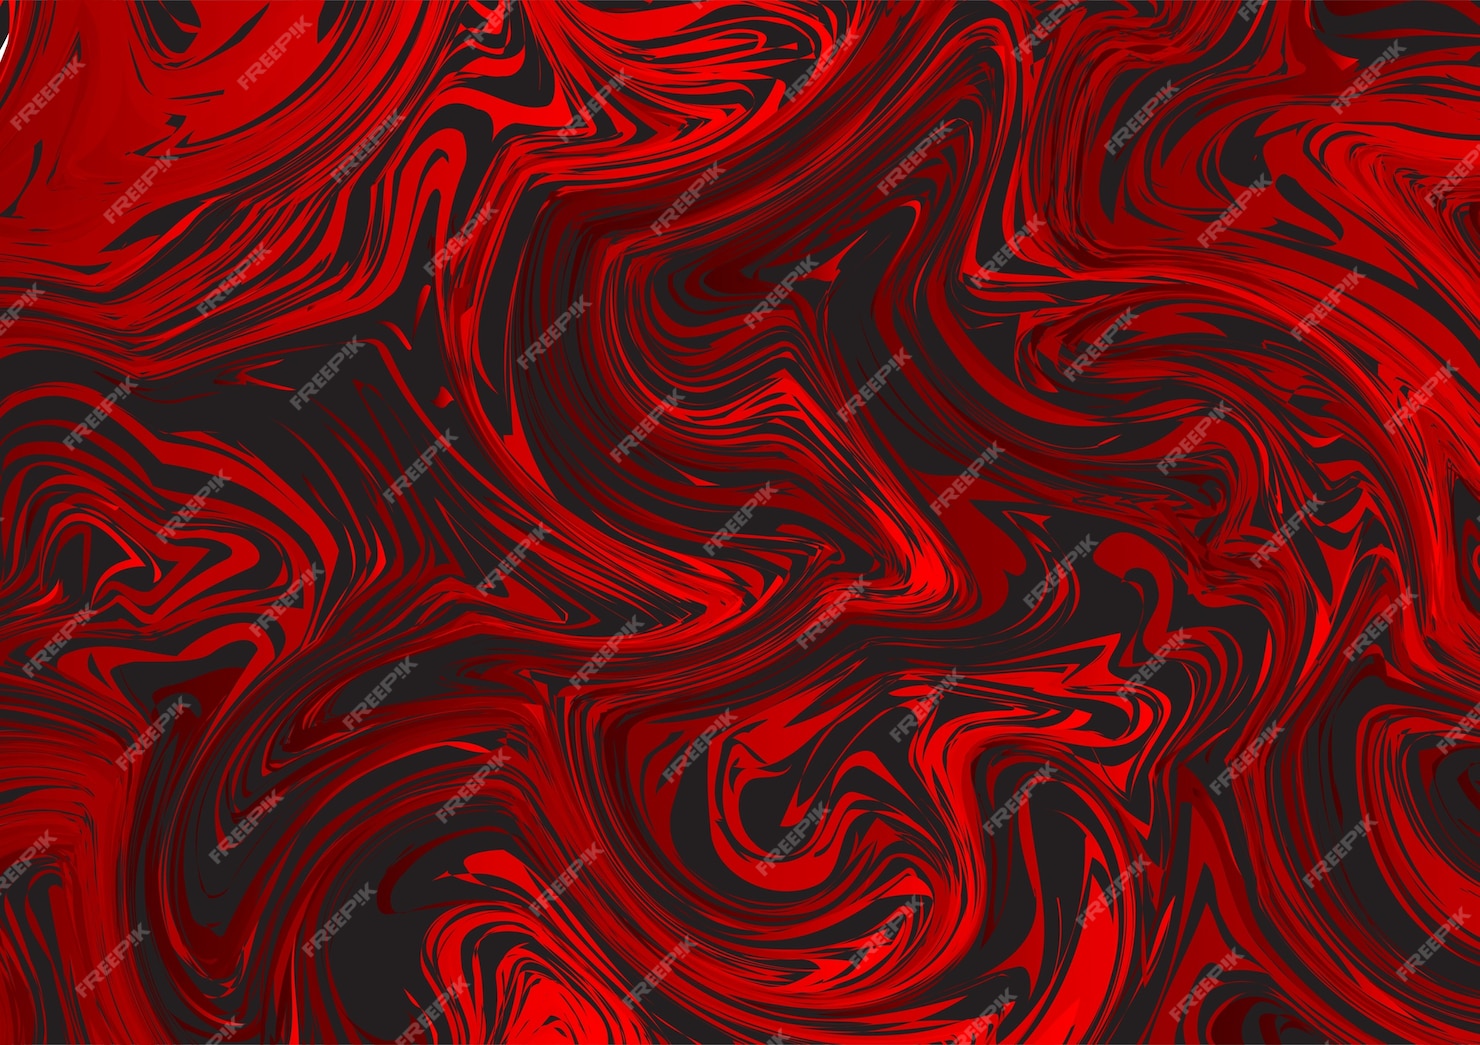 Premium Vector | Red and black liquid abstract vector background